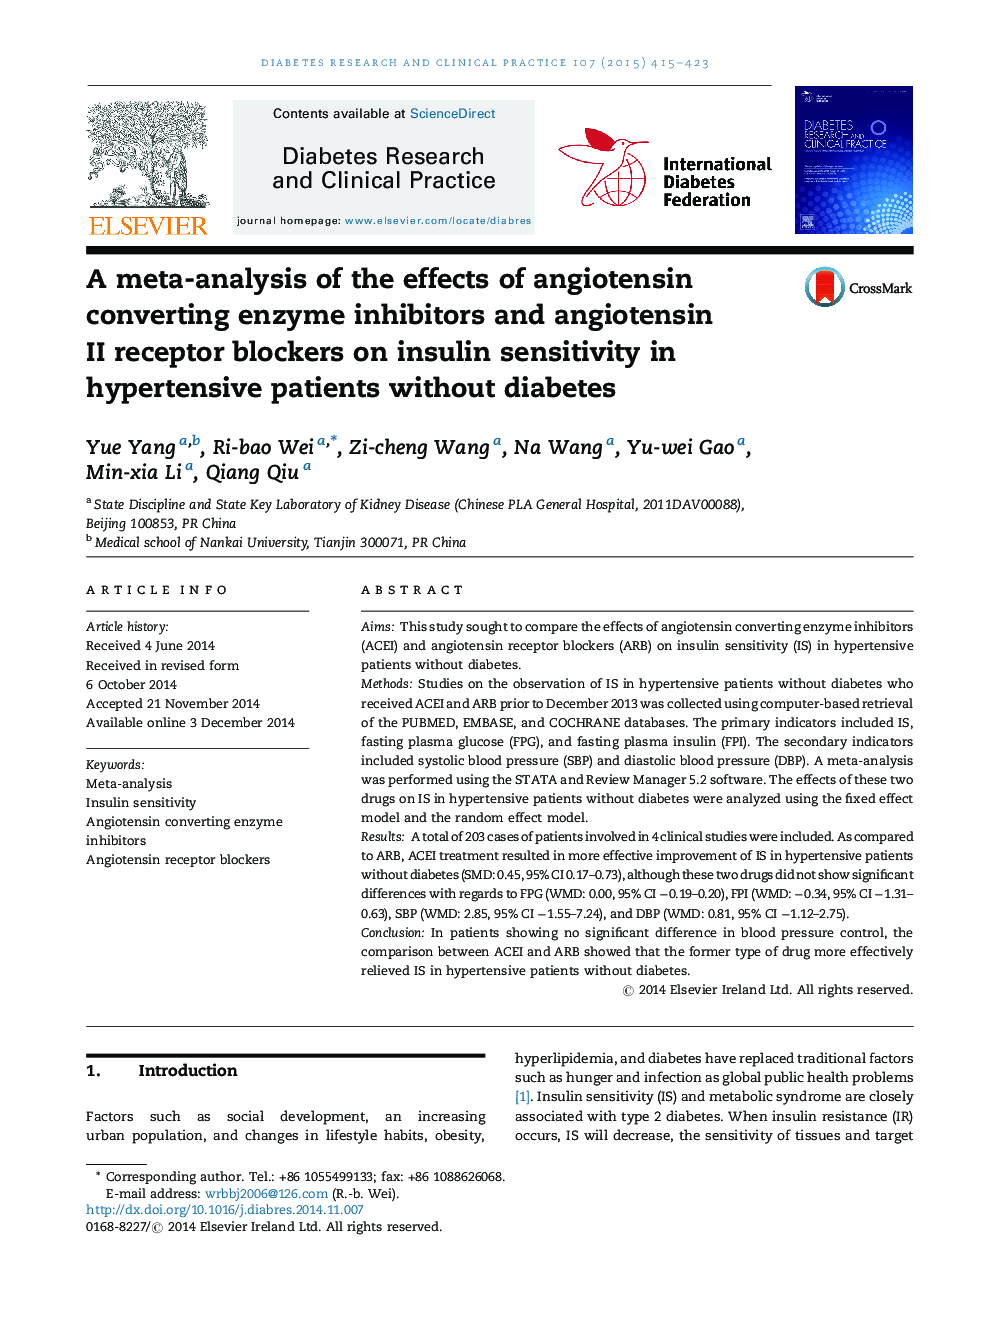 A meta-analysis of the effects of angiotensin converting enzyme inhibitors and angiotensin II receptor blockers on insulin sensitivity in hypertensive patients without diabetes